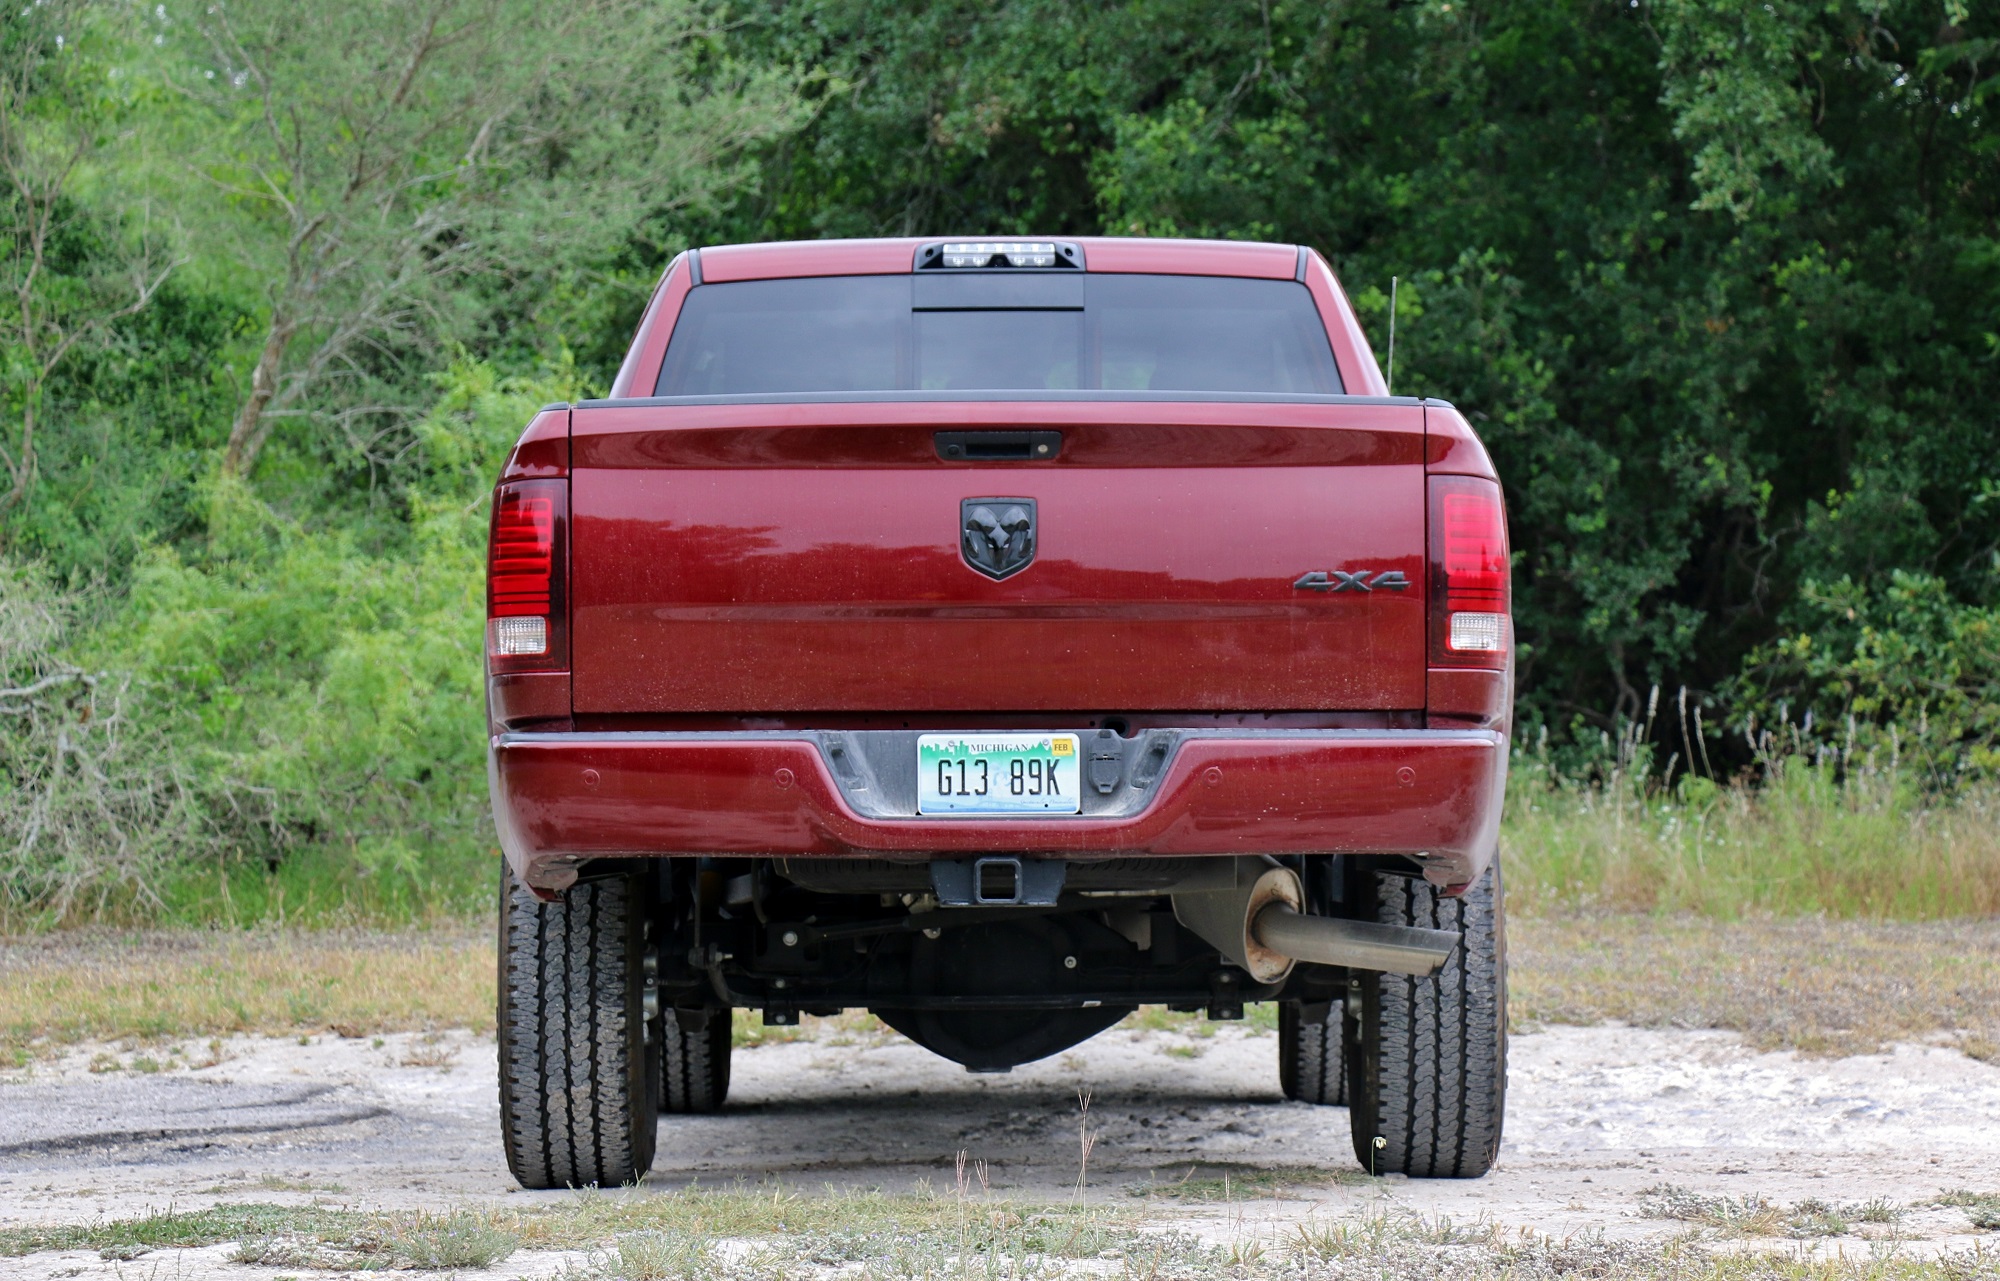 Dodge Forum Review: 2017 Ram 2500 Laramie with the 4x4 Off-road Package